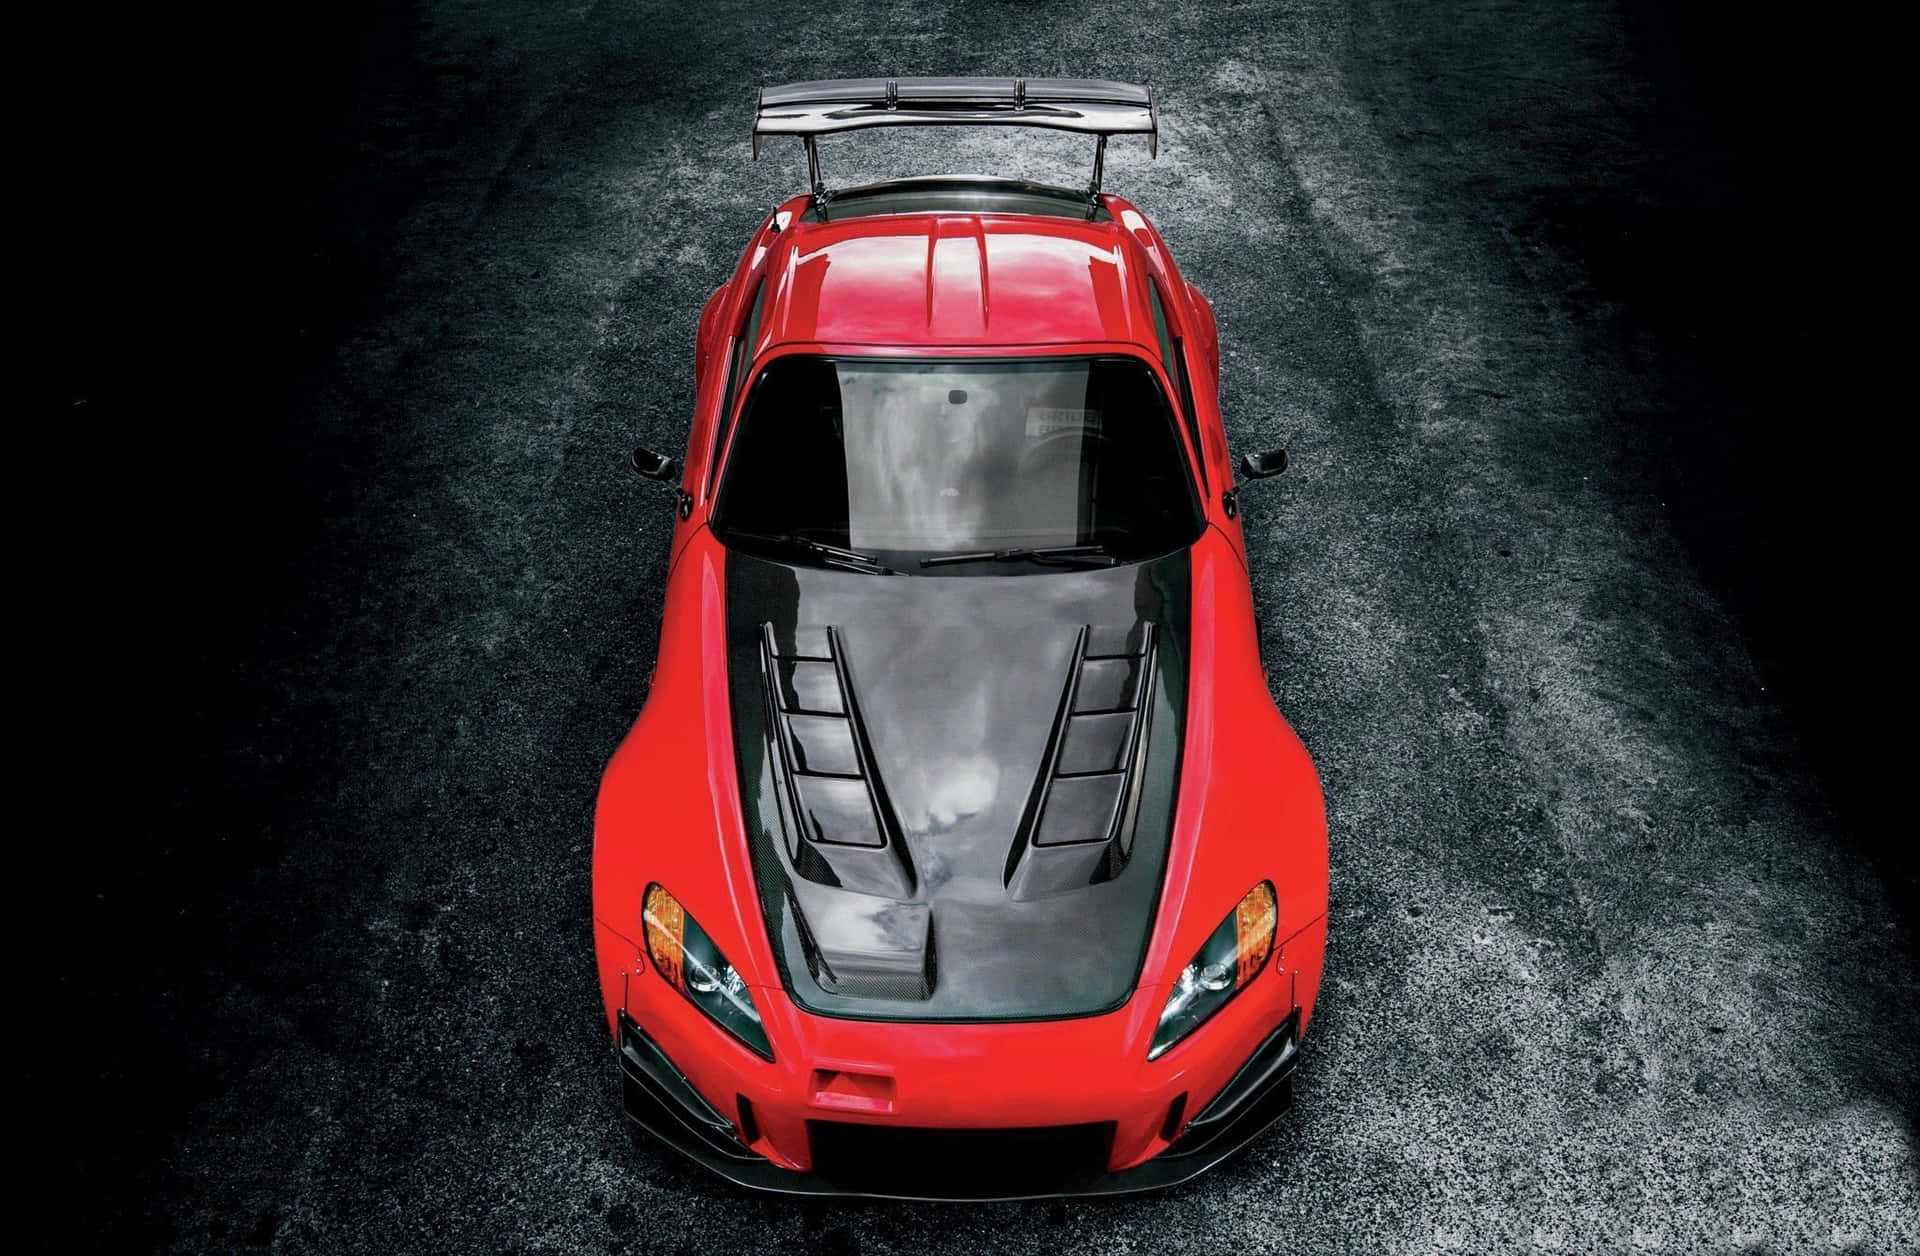 "Feel the power of the Honda S2000 - the world's most responsive sports car" Wallpaper